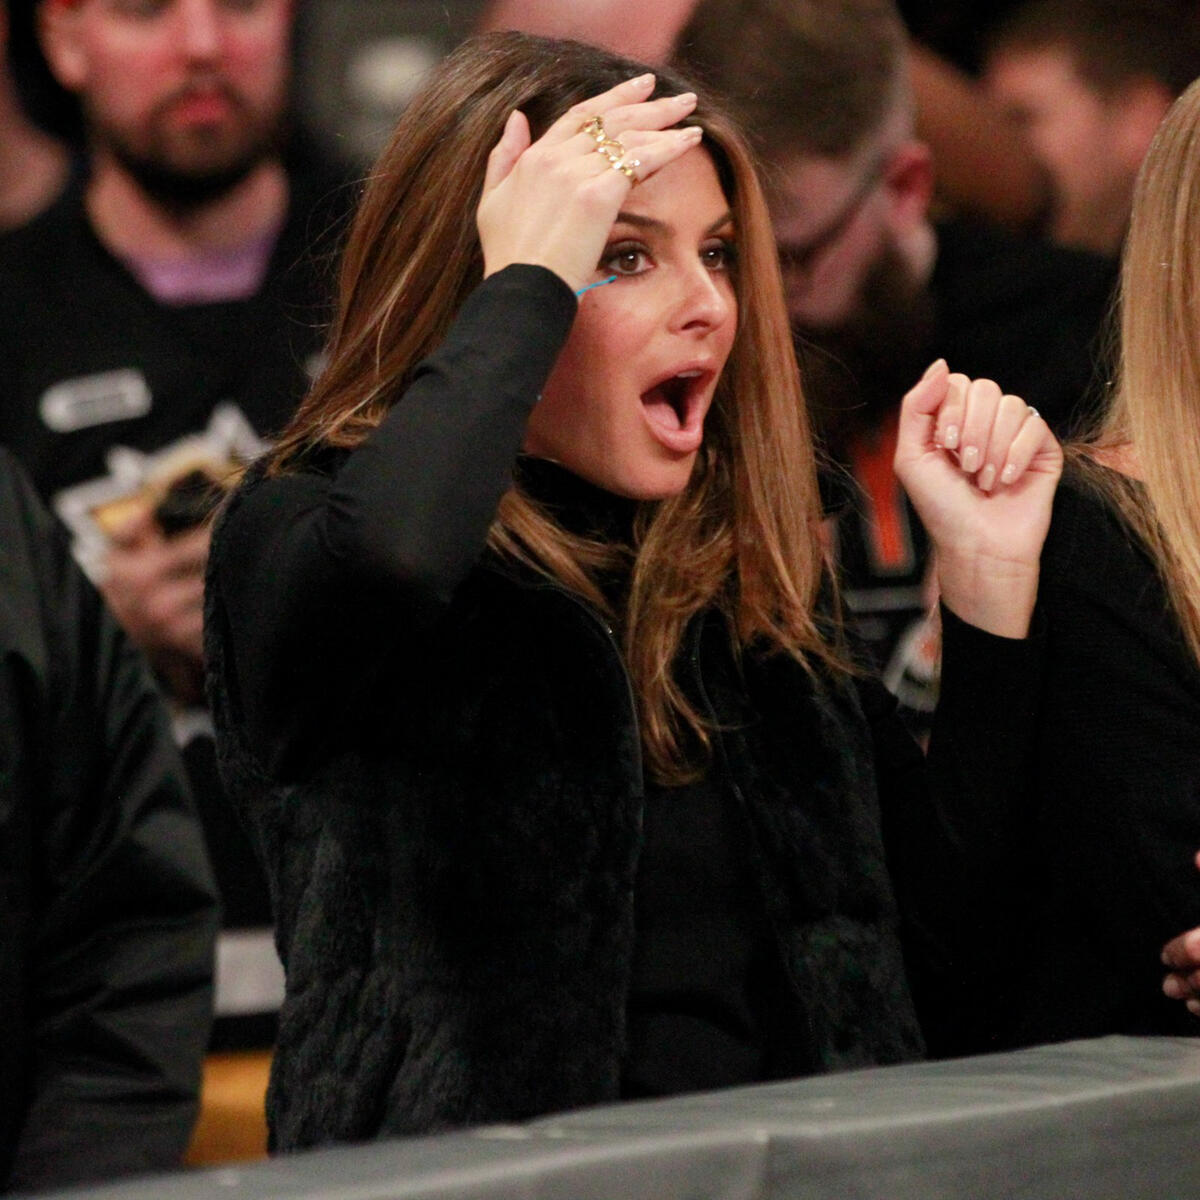 Maria Menounos can't believe the incredible match she just witnessed at NXT TakeOver: Philadelphia.